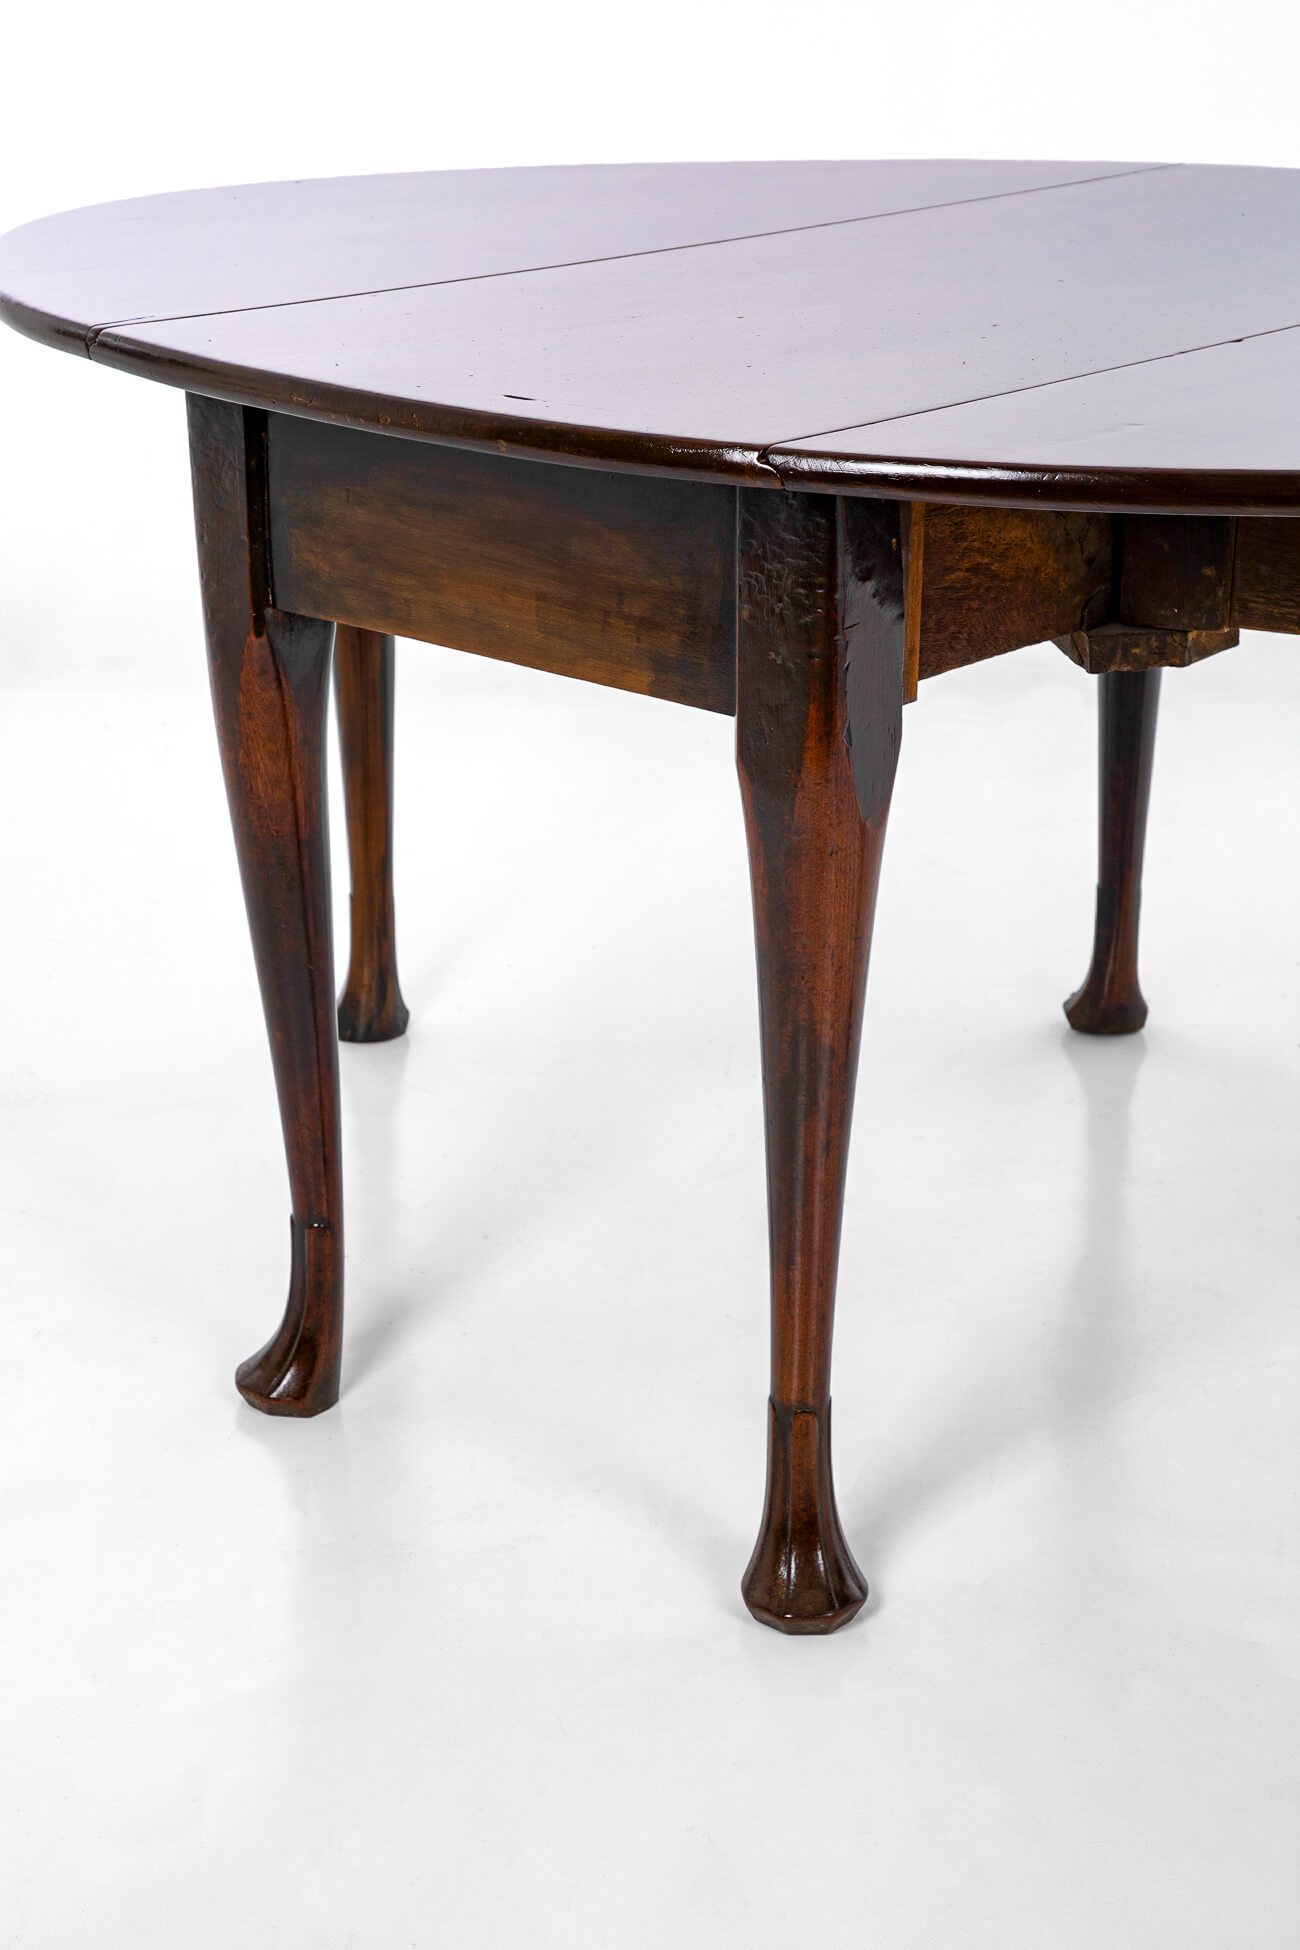 Antique English dining table